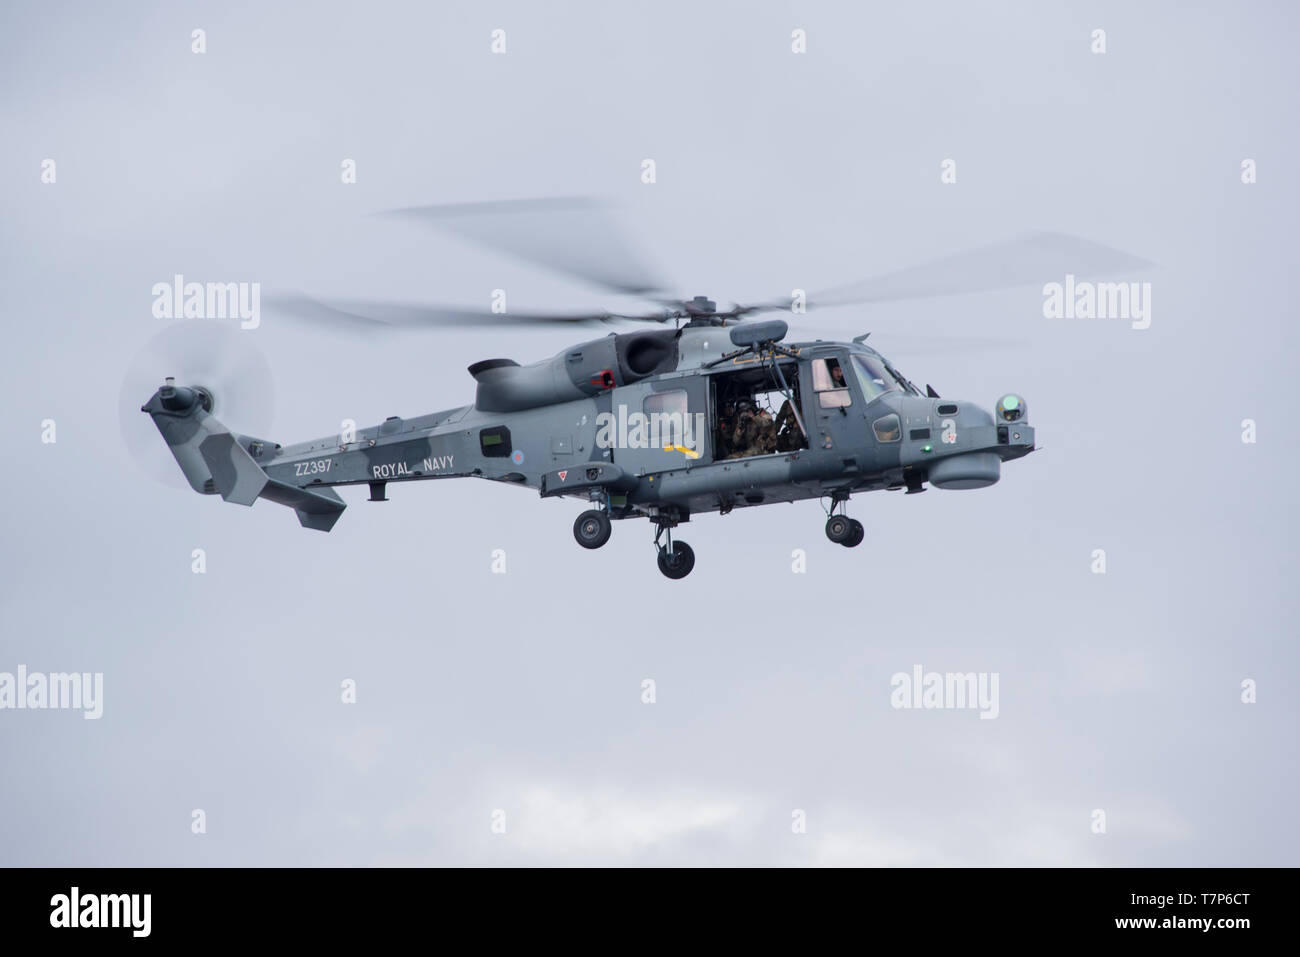 A British Royale Navy Wildcat attack helicopter conducts a series of training exercises and scenarios with a Tactical Training Boat (TTB) crew attached to Coast Guard Helicopter Tactical Interdiction Squadron (HITRON) May 2, 2019, on the St. Johns River in Jacksonville, Florida. HITRON crewmembers worked alongside the British Royale Navy and Dutch Navy during Operation Iron Eagle, a two week international training exercise. (U.S. Coast Guard photo by Petty Officer 3rd Class Ryan Dickinson) Stock Photo